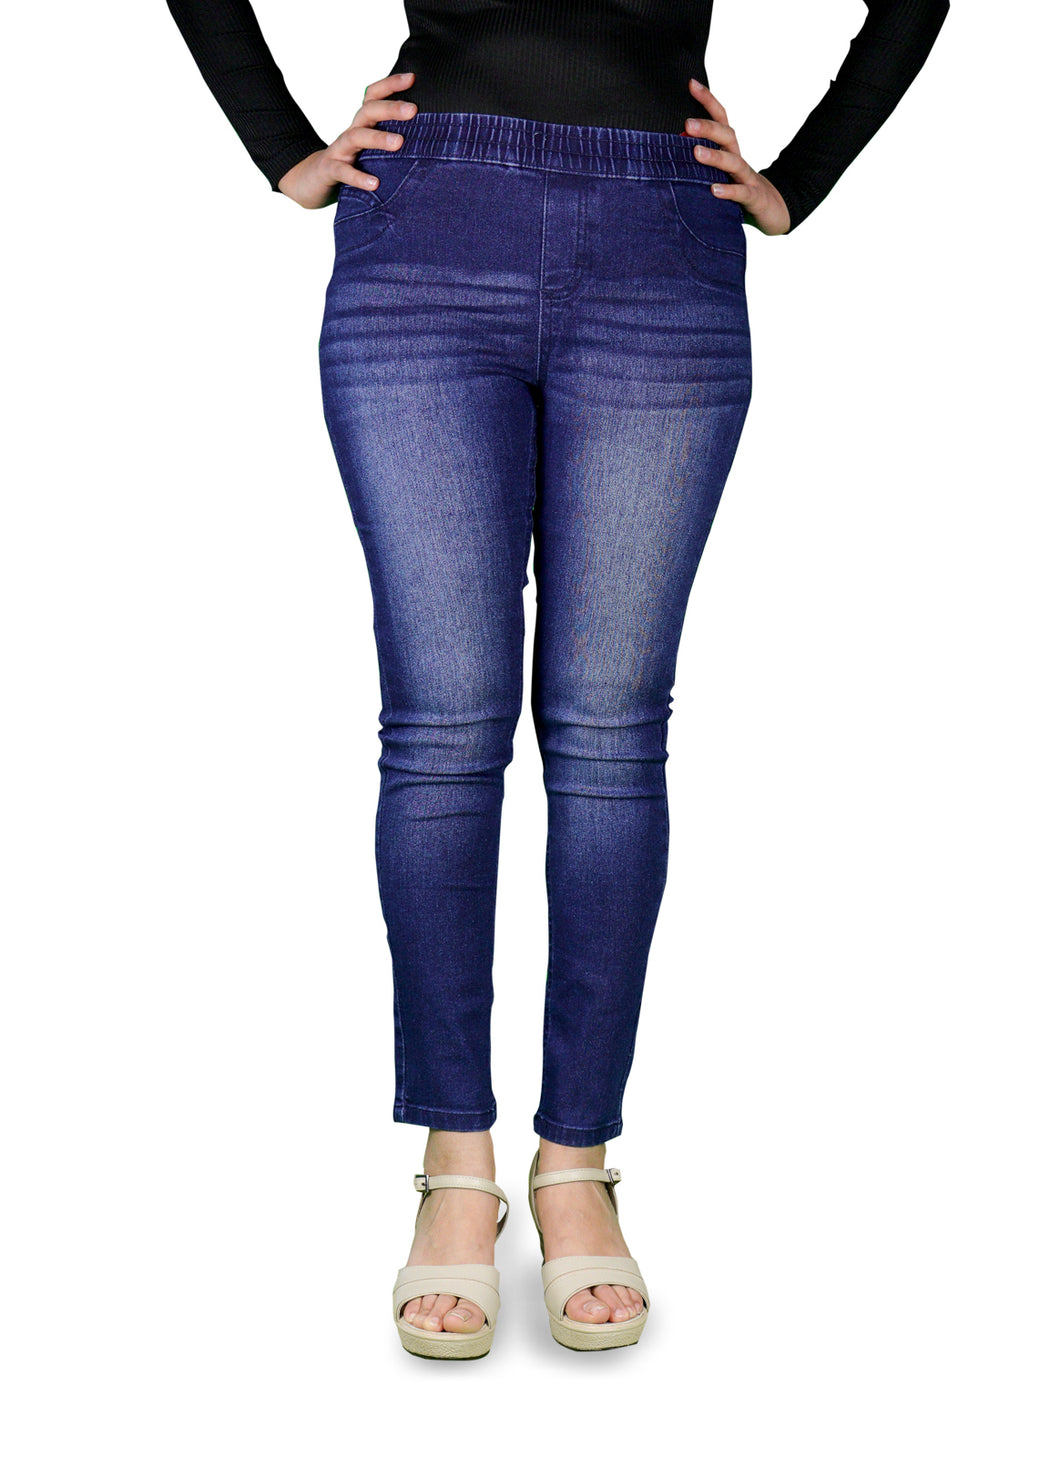 Buy Xpose Women Blue Check Skinny Fit High Rise Checked Treggings online